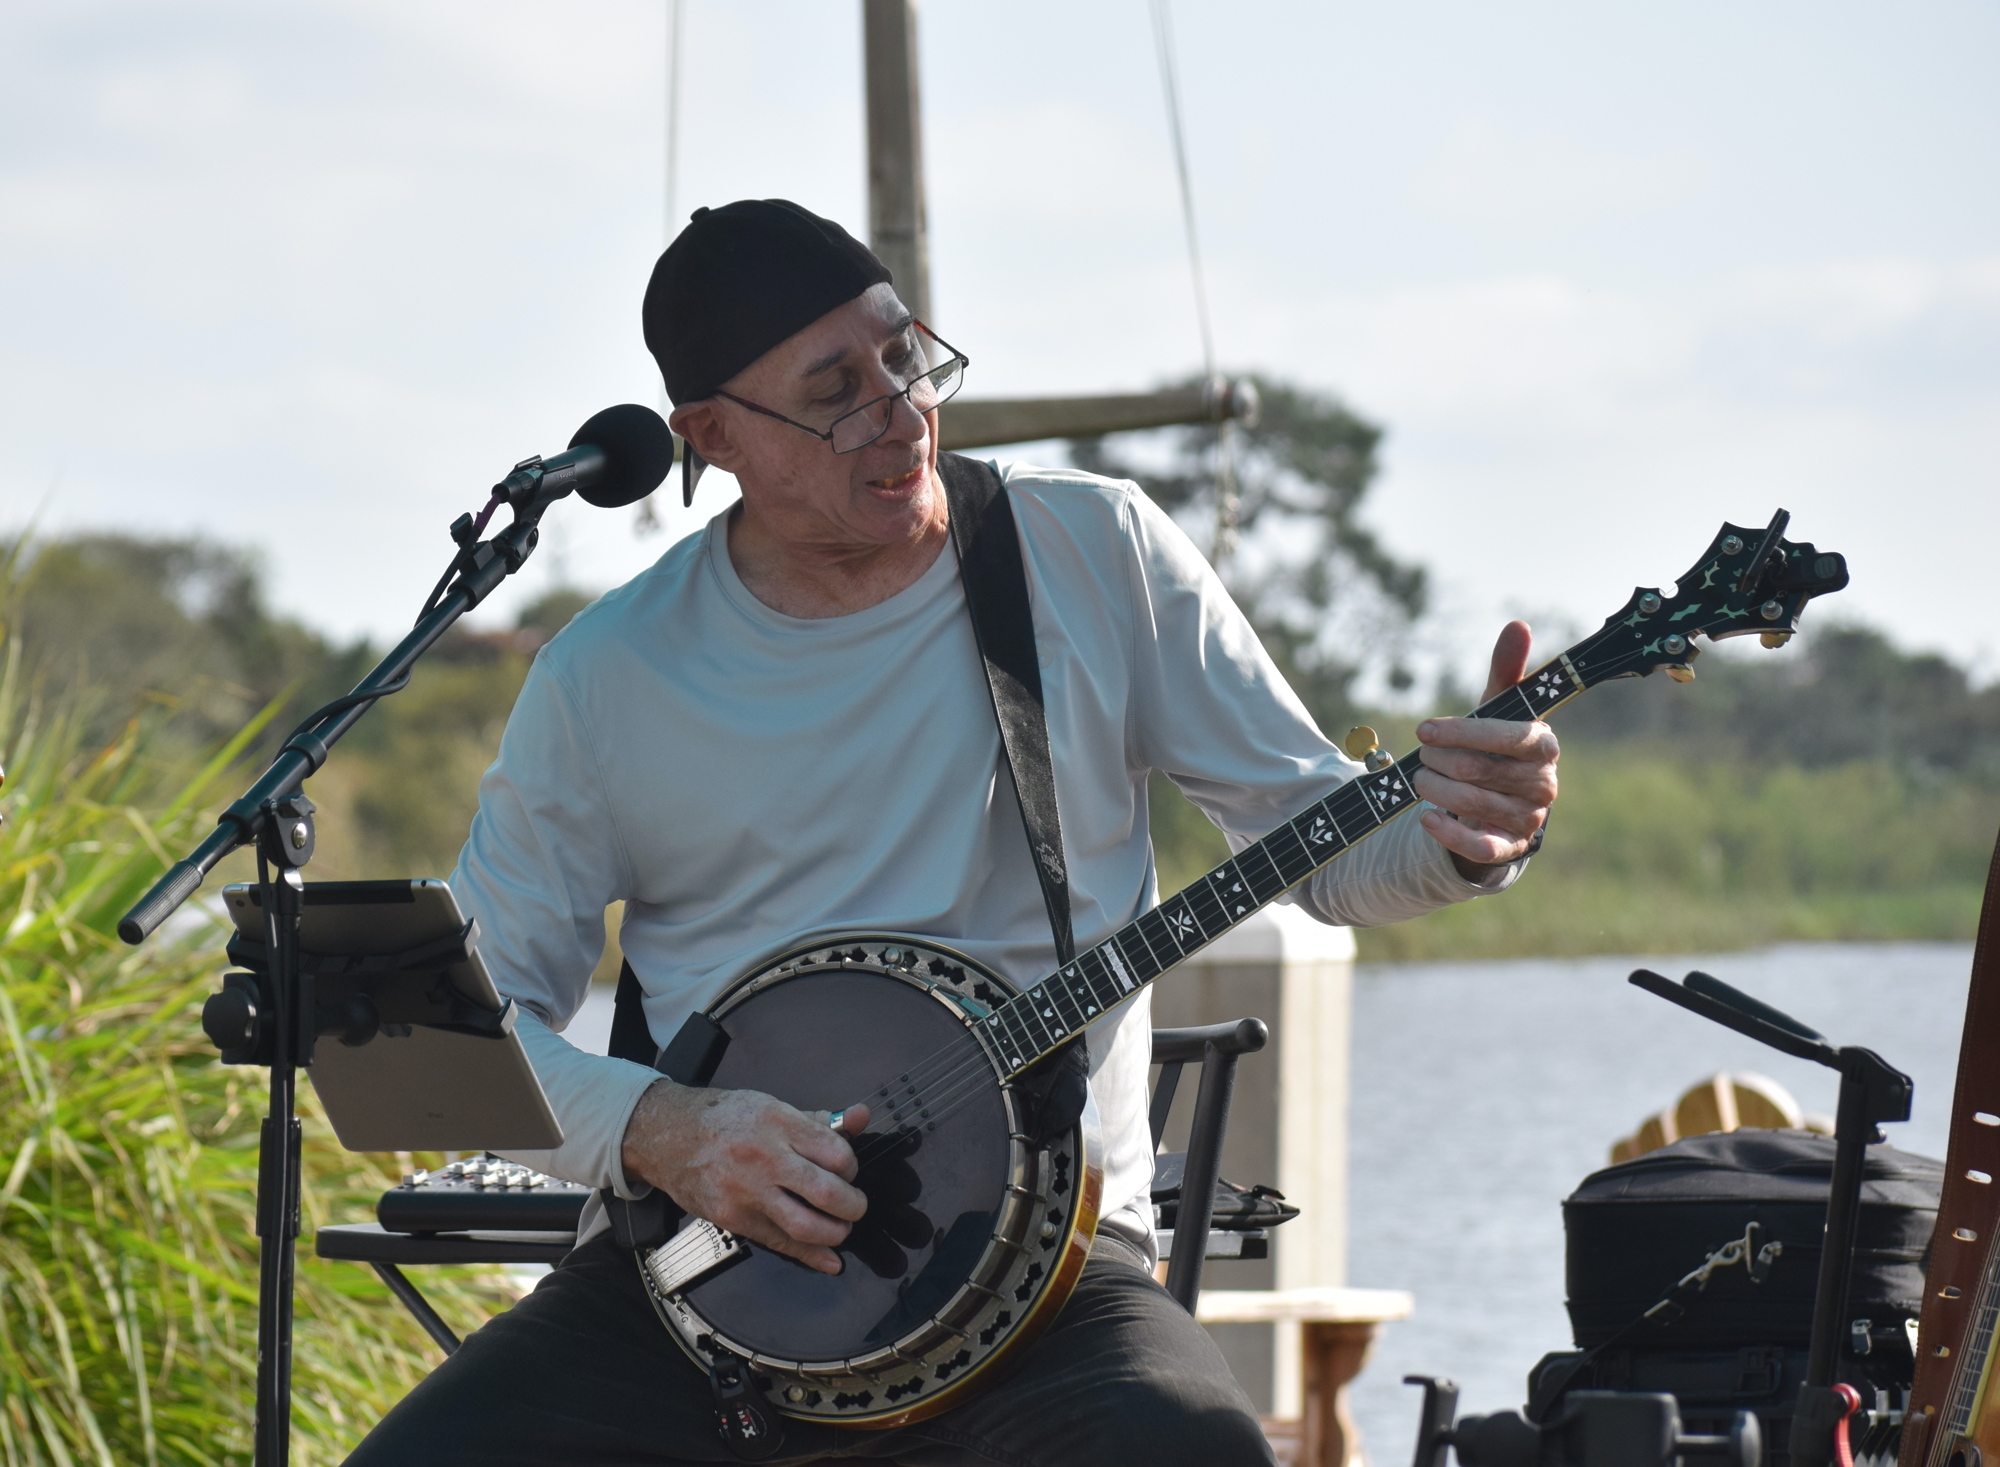 Hal Meyers fires up his banjo at Jiggs Landing. (Photo by Jay Heater)